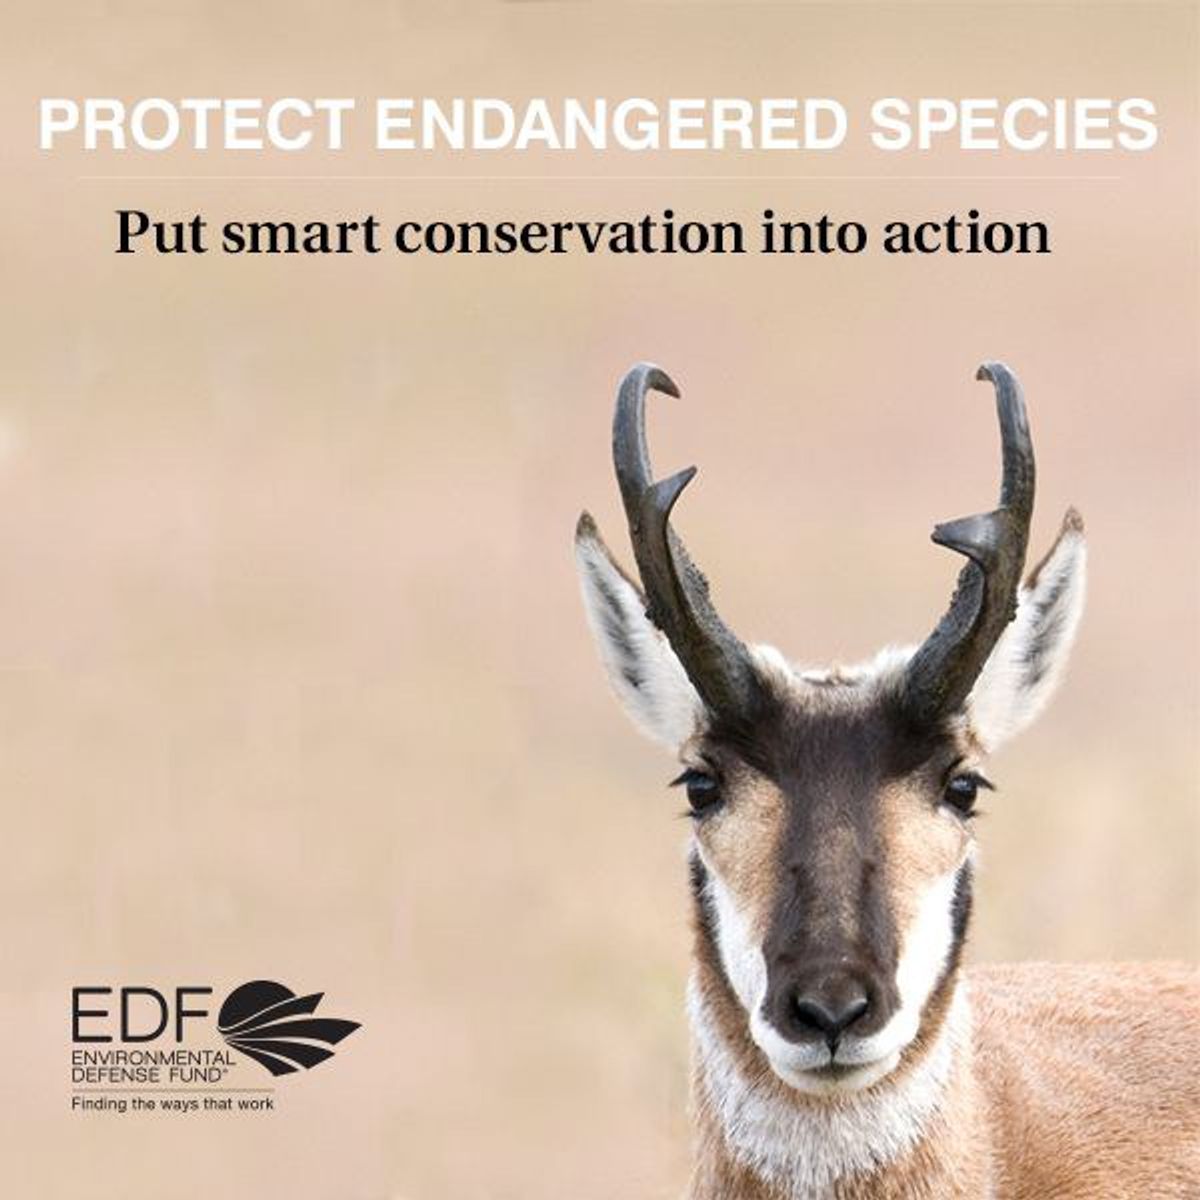 Facts About the Endangered Species Act